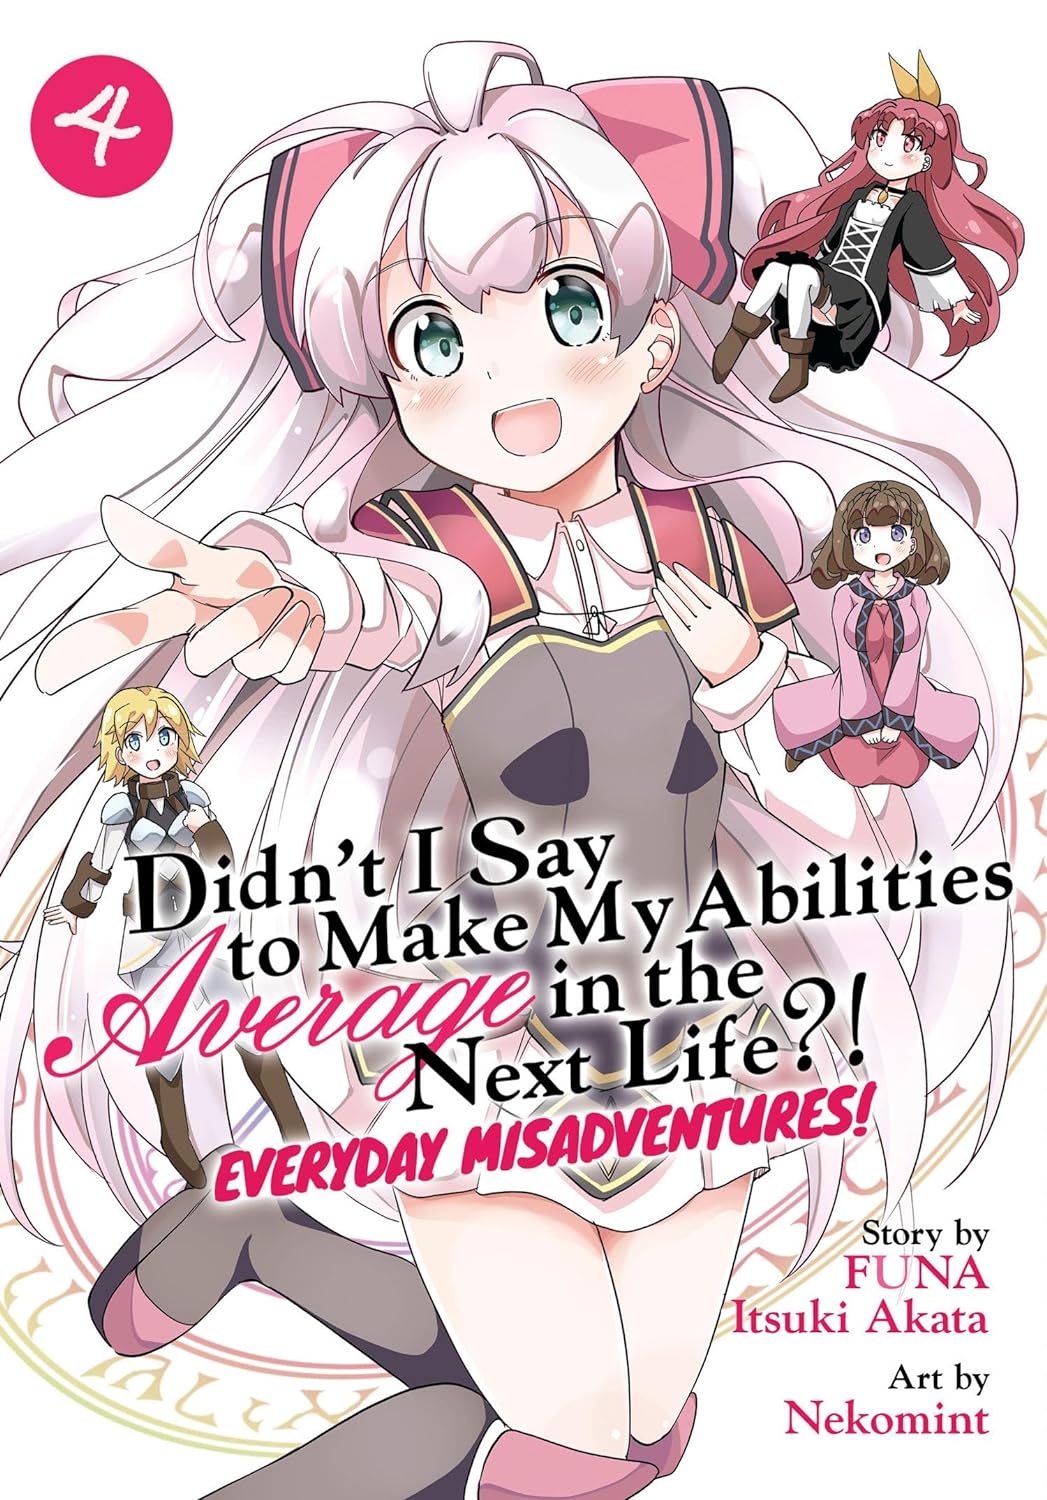 Didn't I Say to Make My Abilities Average in the Next Life?! Everyday Misadventures! (Manga) Vol. 04